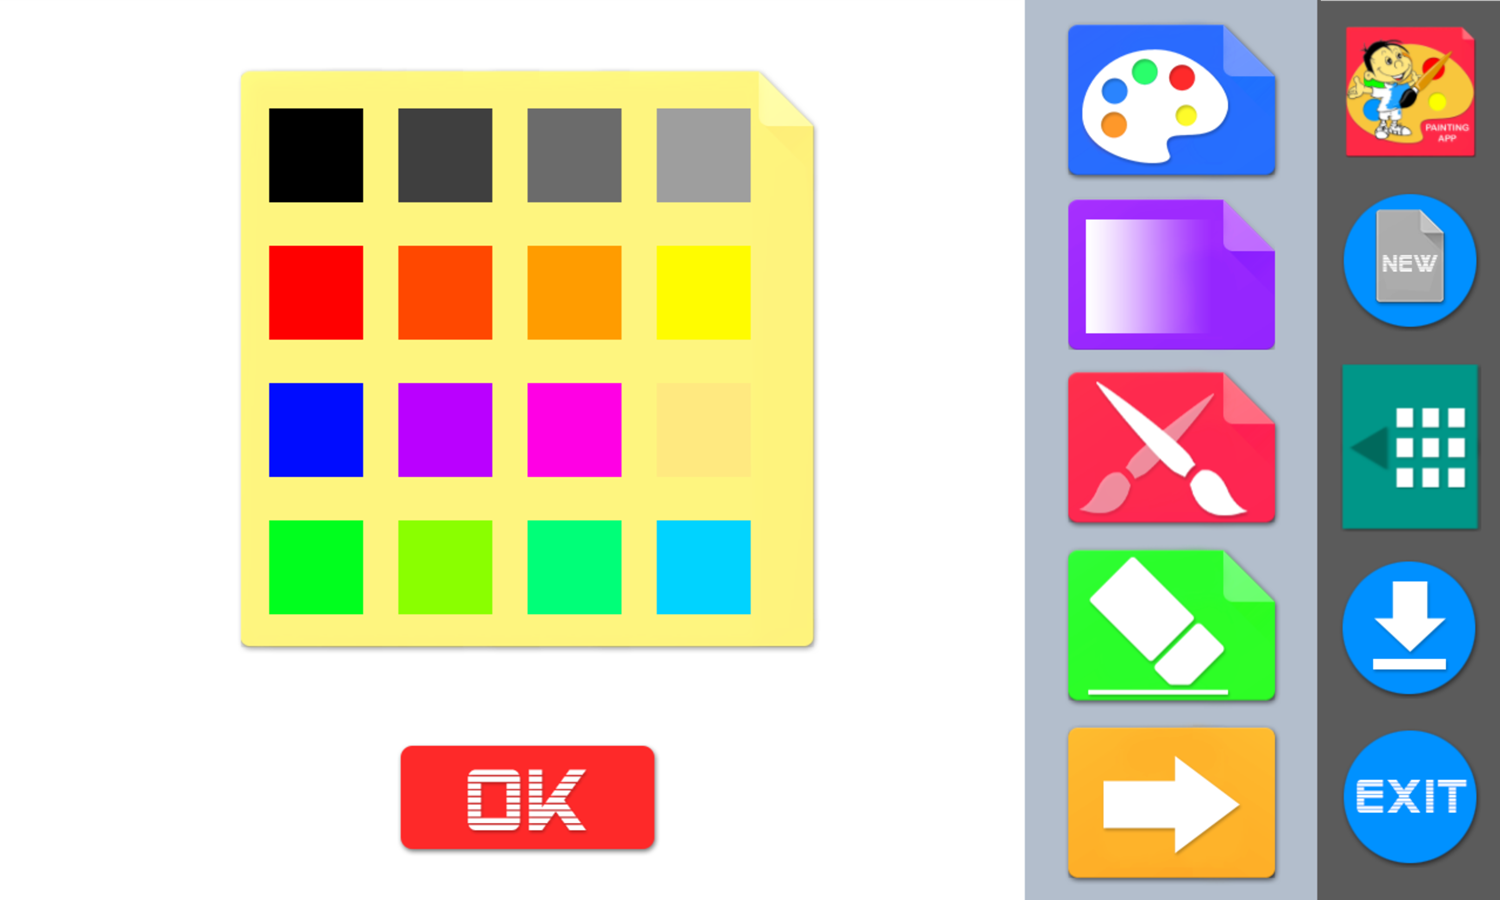 PAINT AND RUN - Play Online for Free!